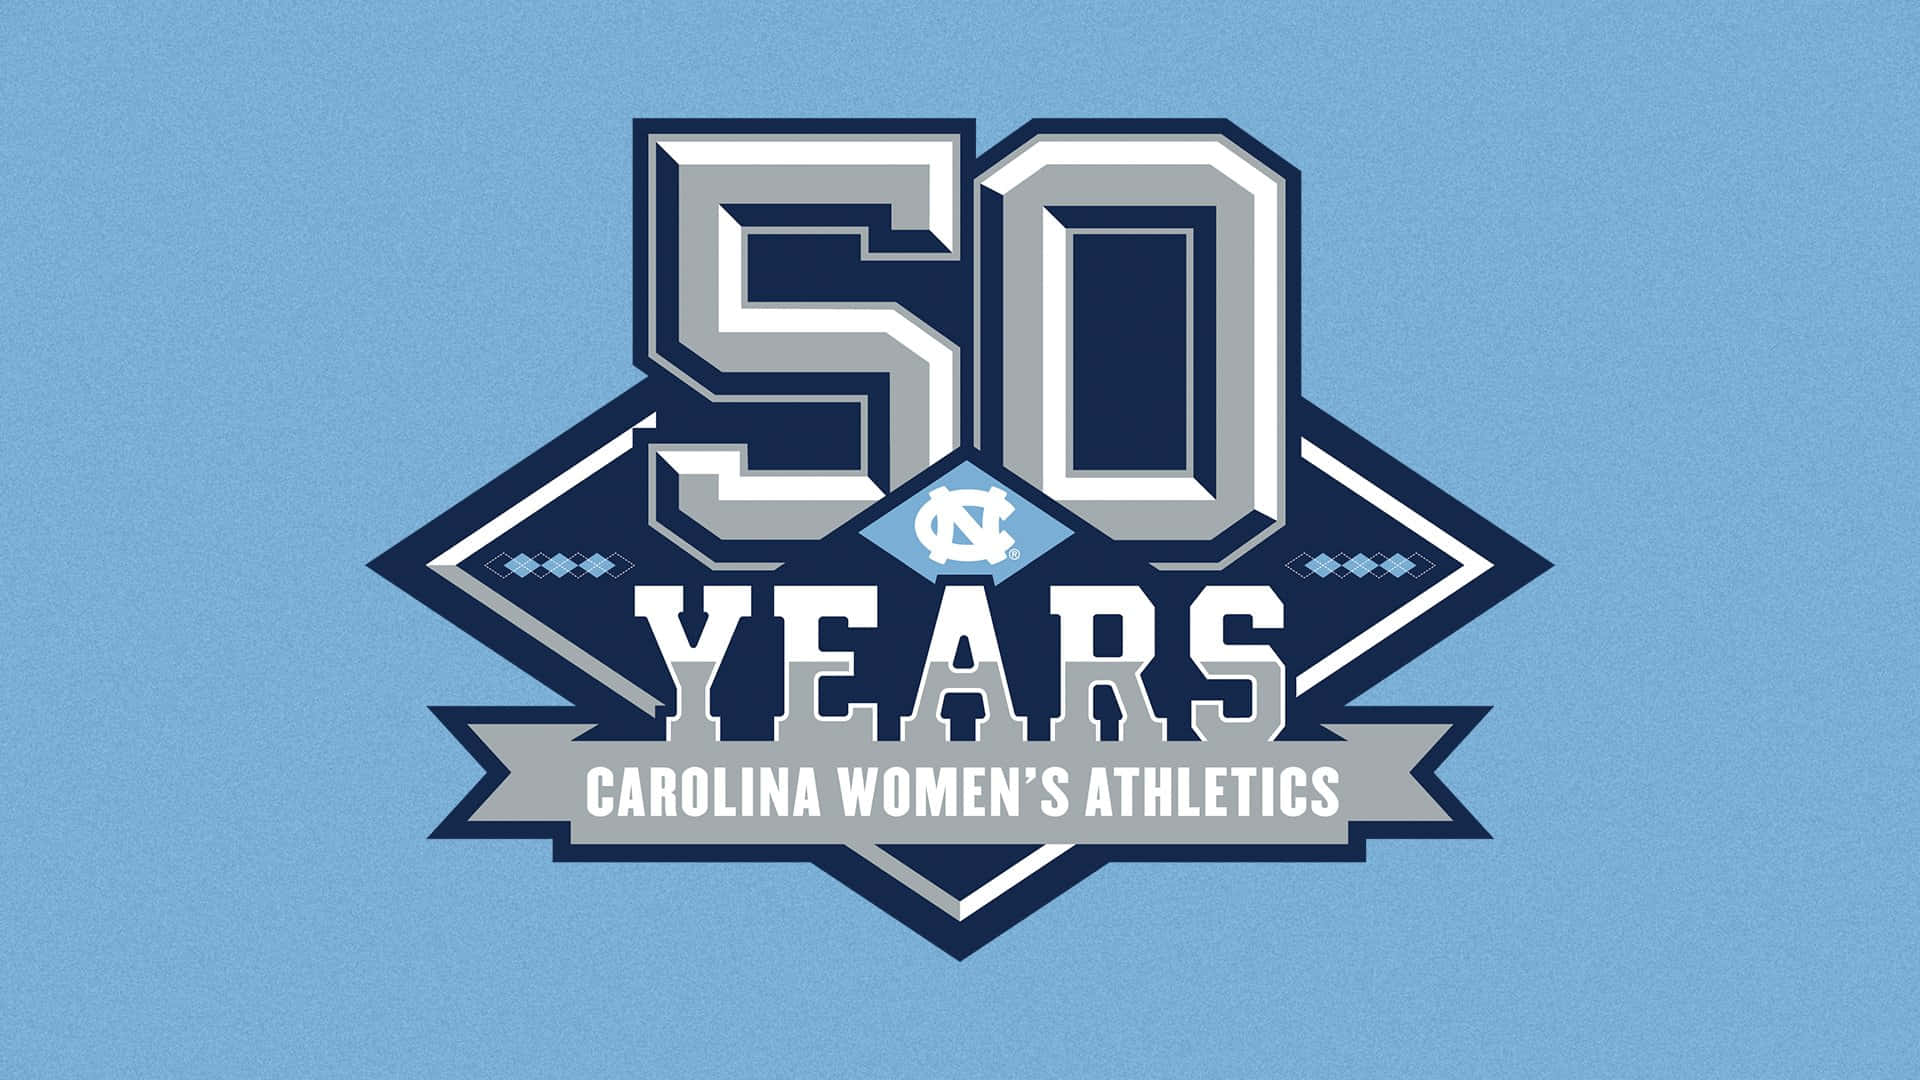 The Logo For The 50th Anniversary Of The Carolina Women's Athletics Background